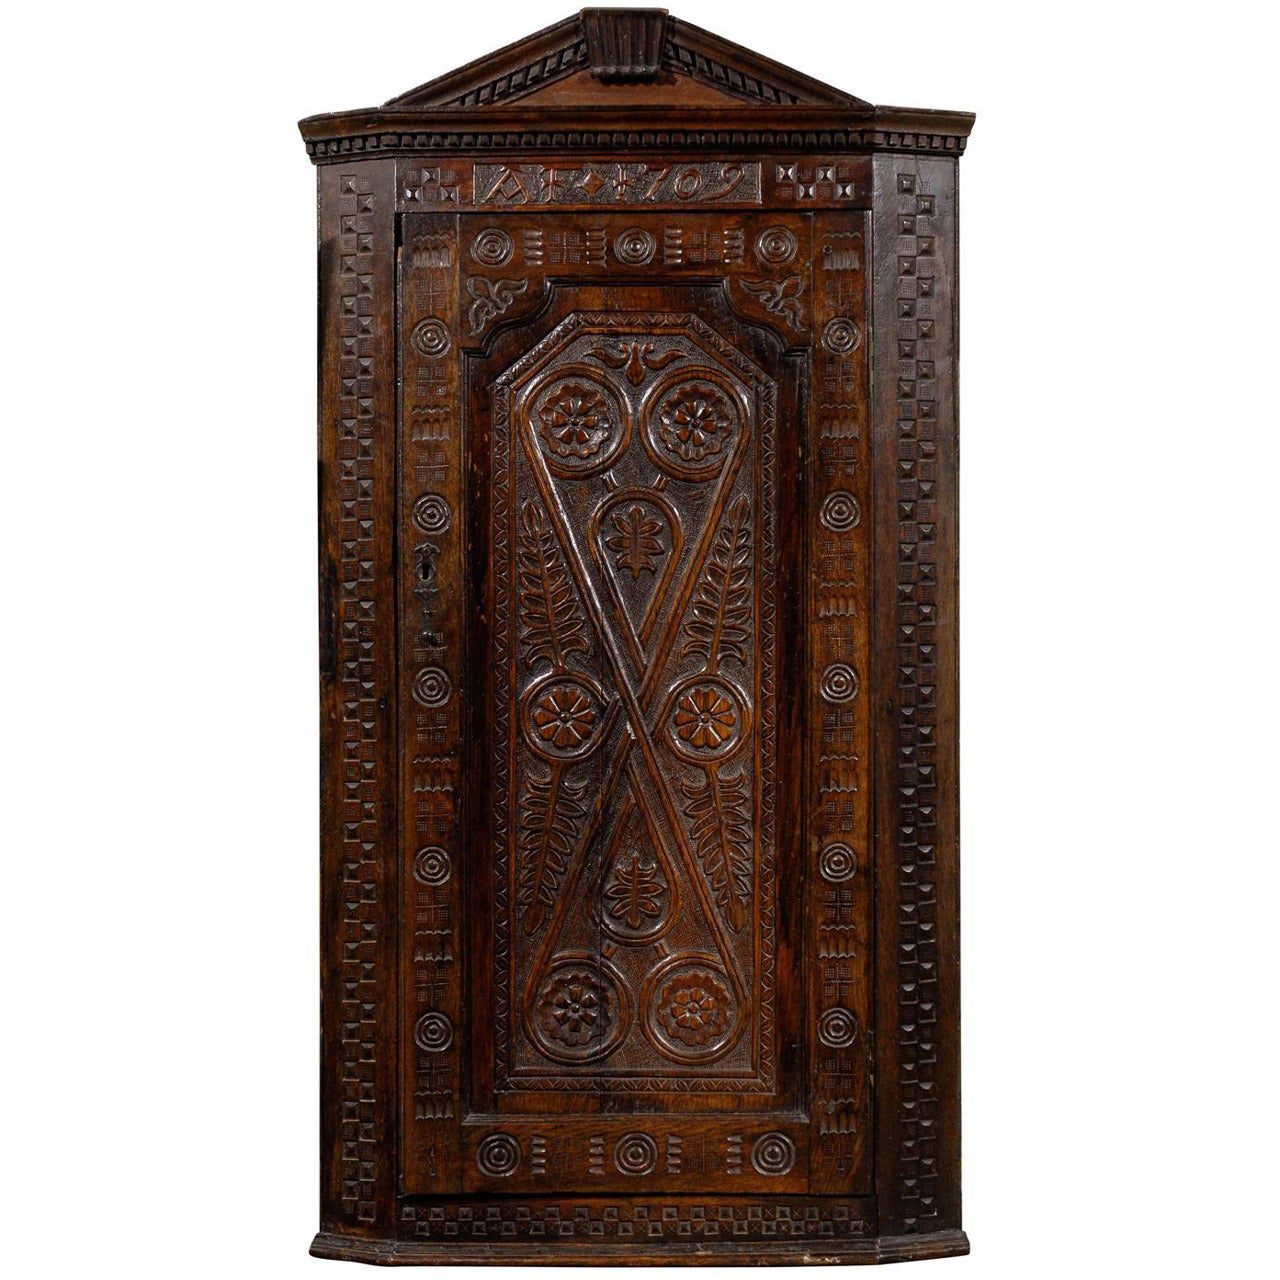 Early 18th Century English Carved Corner Cupboard